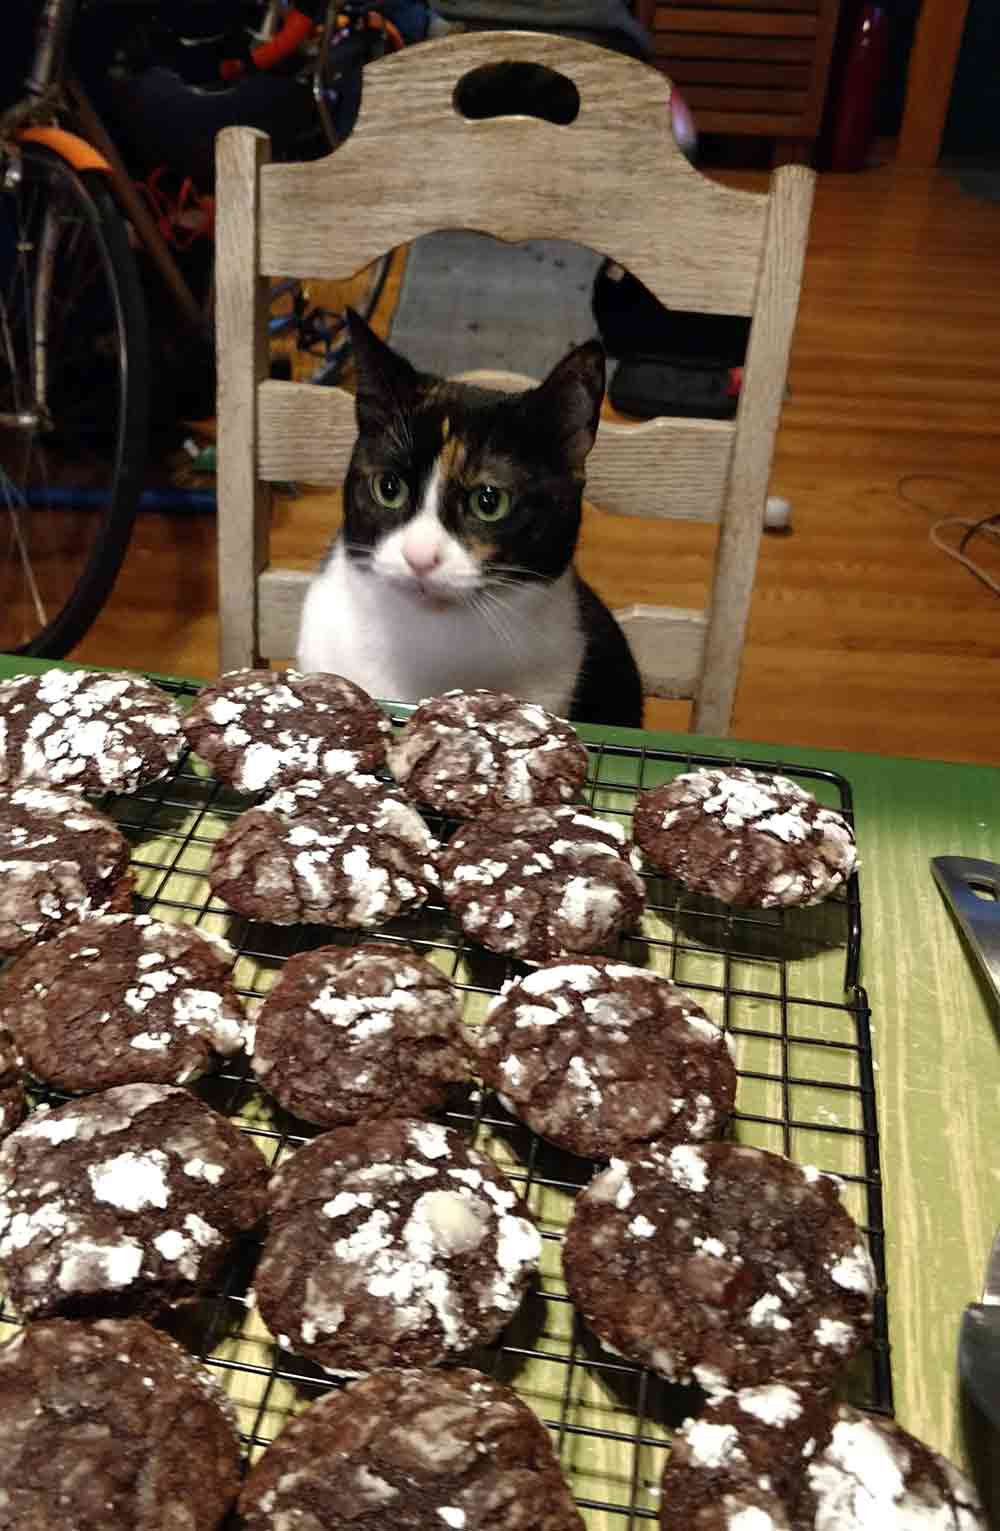 A table of freshly baked chocolate-ginger crinkle cookies covered in powder sugar